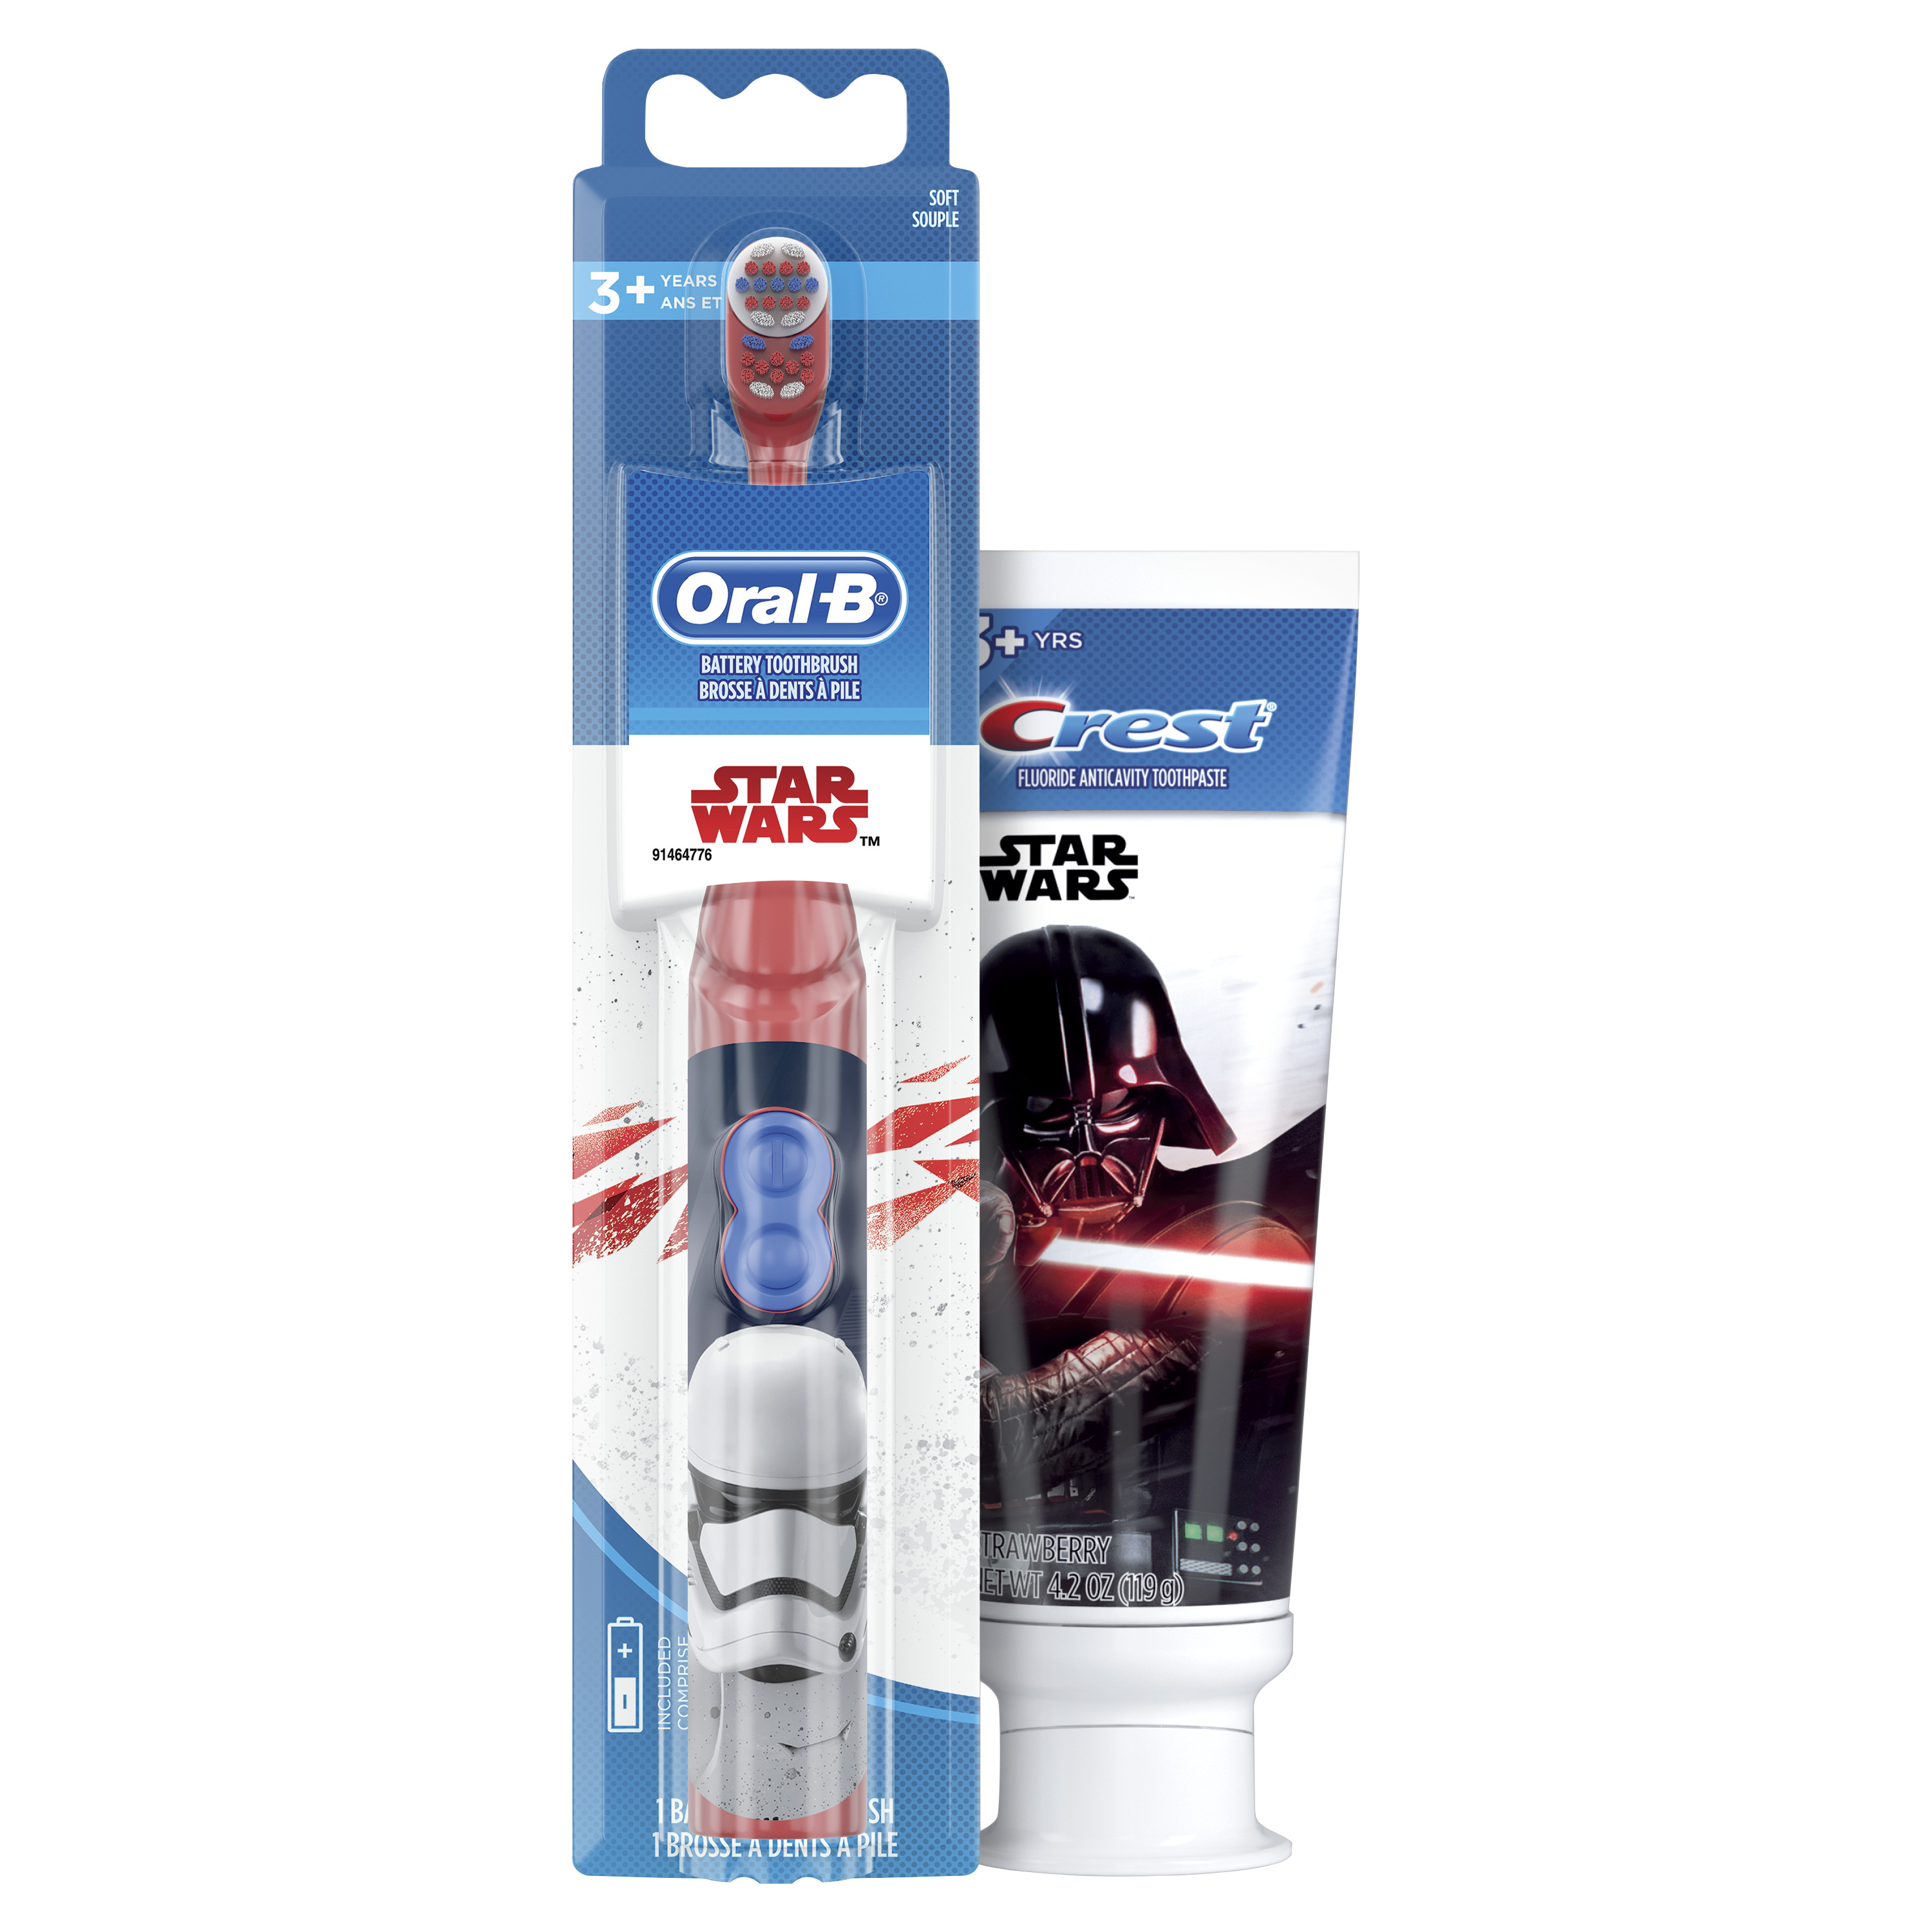 Crest & Oral-B Kids Star Wars Gift Pack with Power Toothbrush and Toothpaste, 4.2 Oz - image 3 of 10